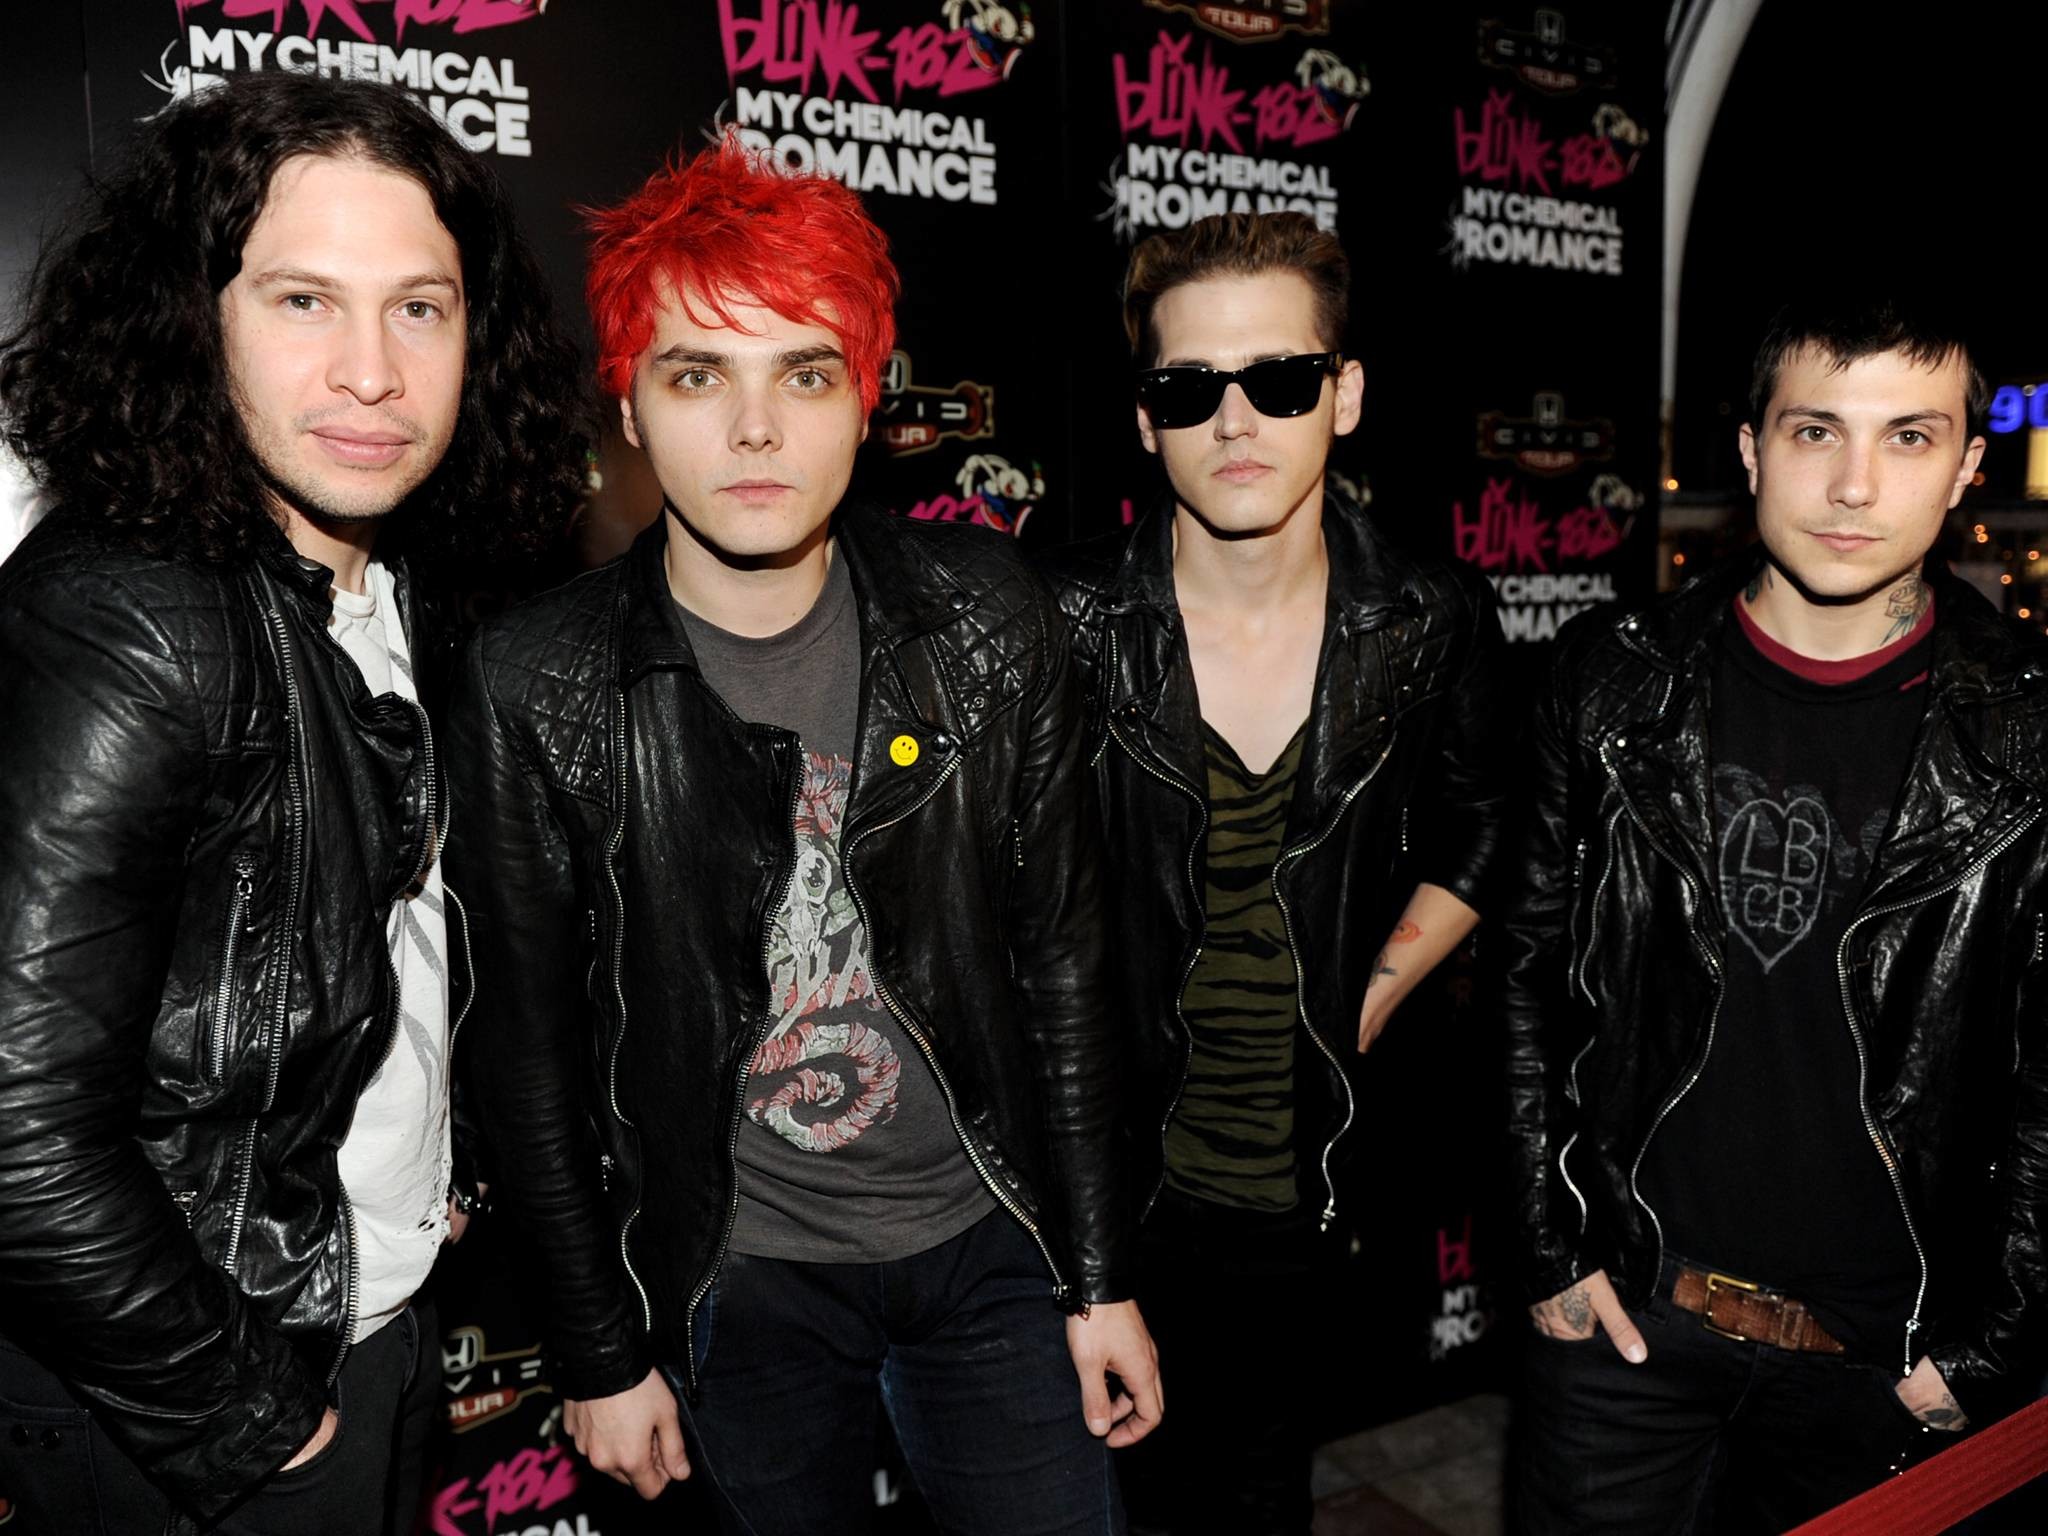 Best my chemical romance images on pinterest emo bands music bands and killjoys